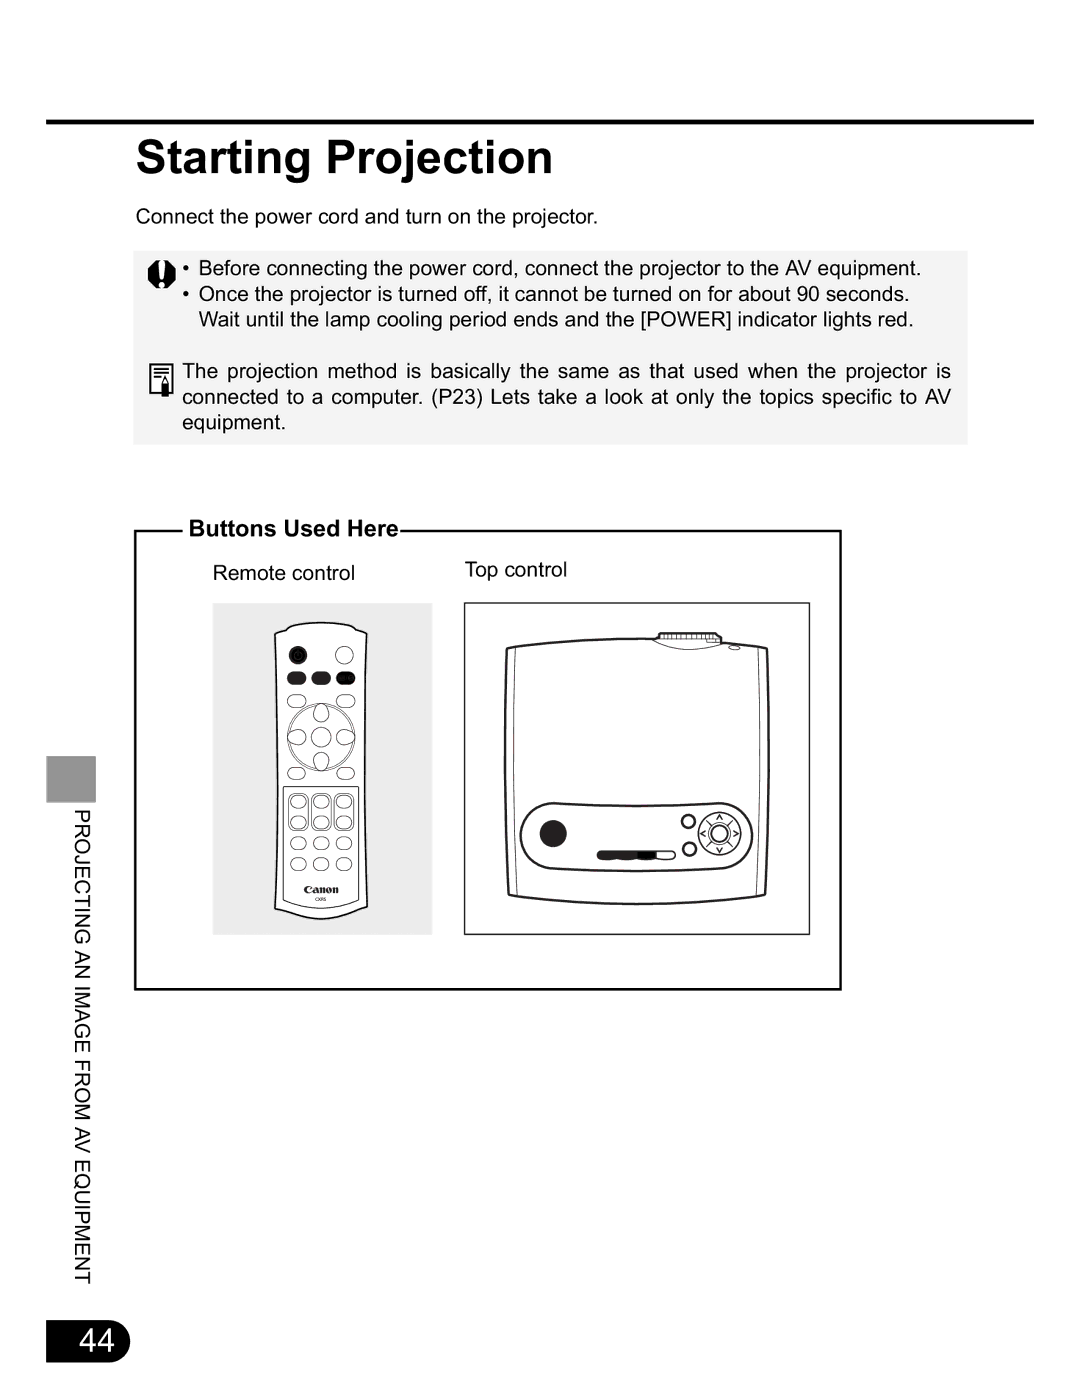 Canon SX20 manual Starting Projection 